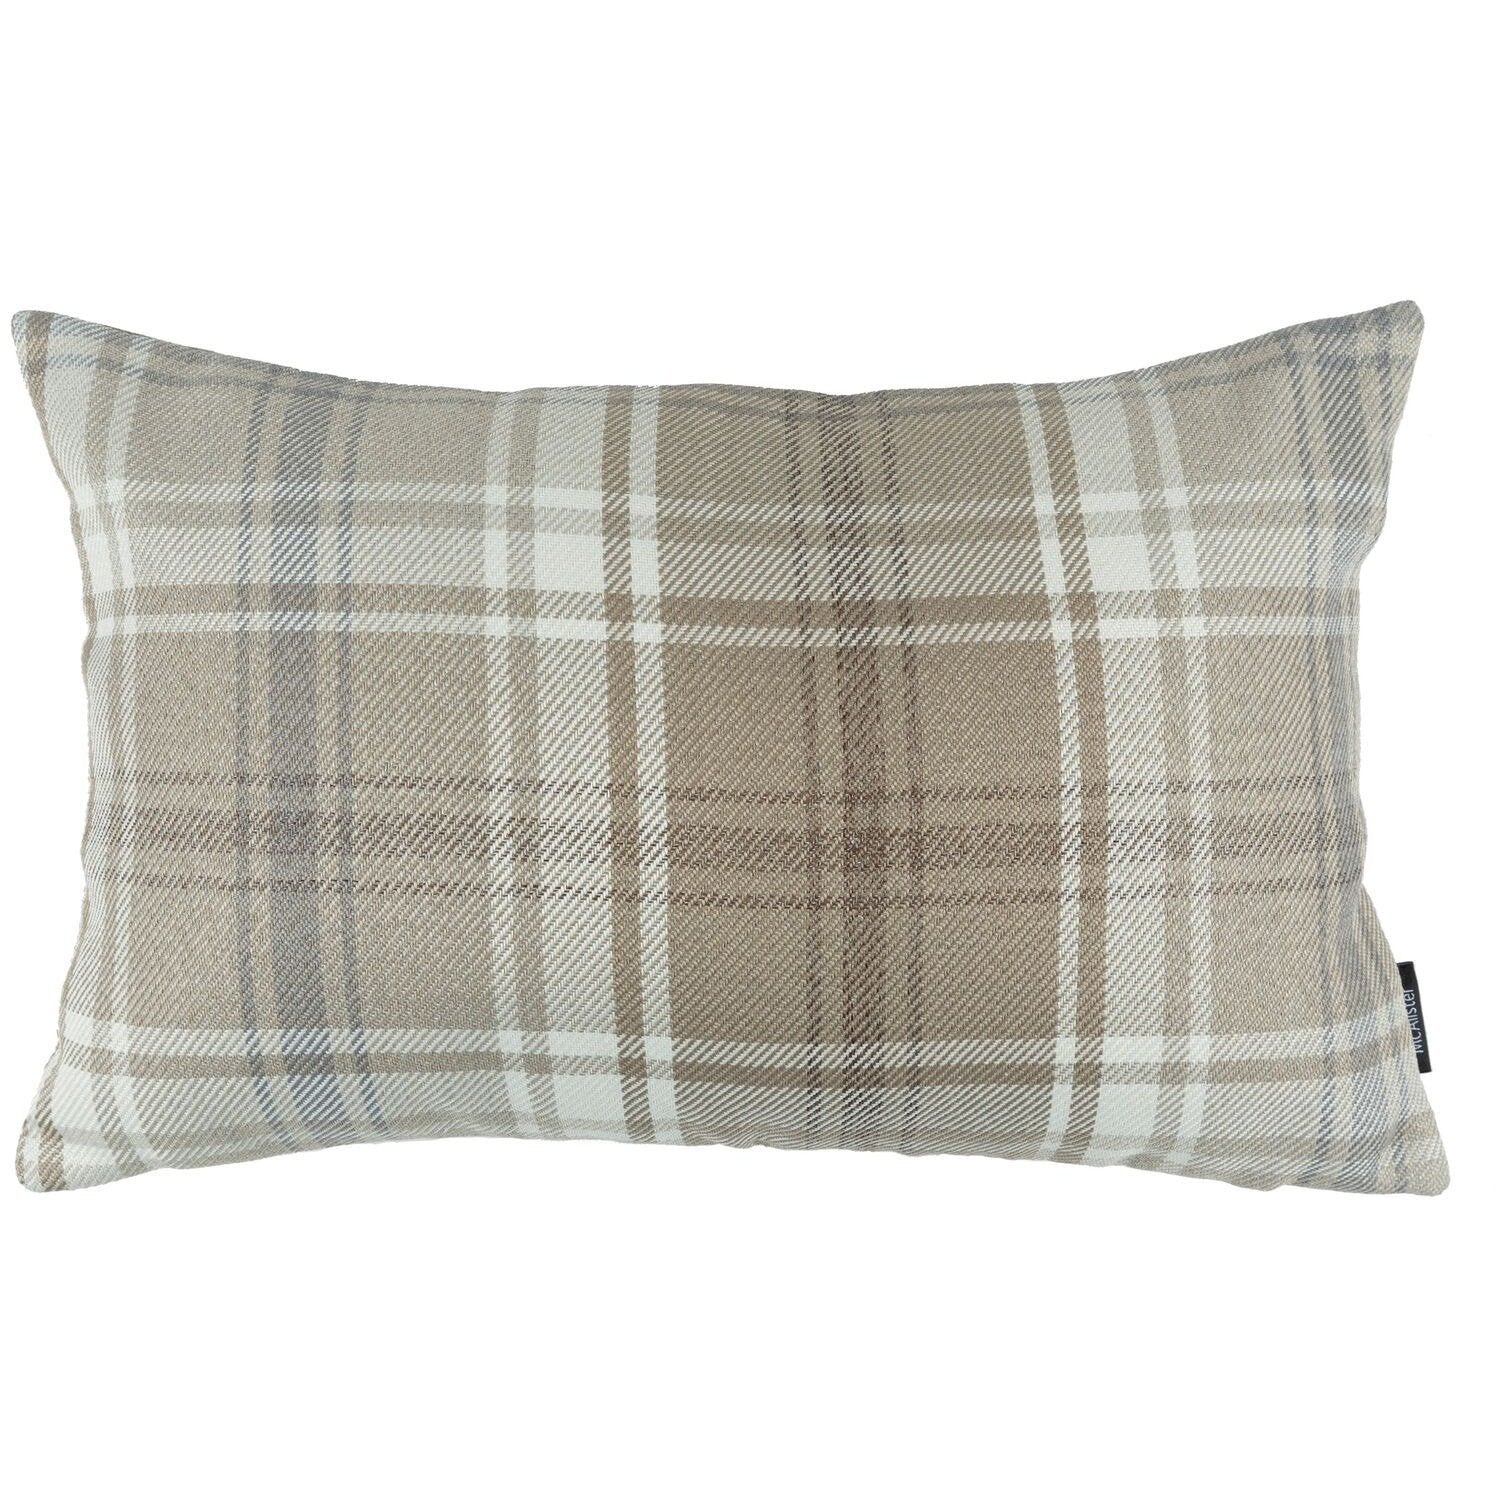 McAlister Textiles Angus Beige Cream Tartan Cushion Cushions and Covers Cover Only 50cm x 30cm 